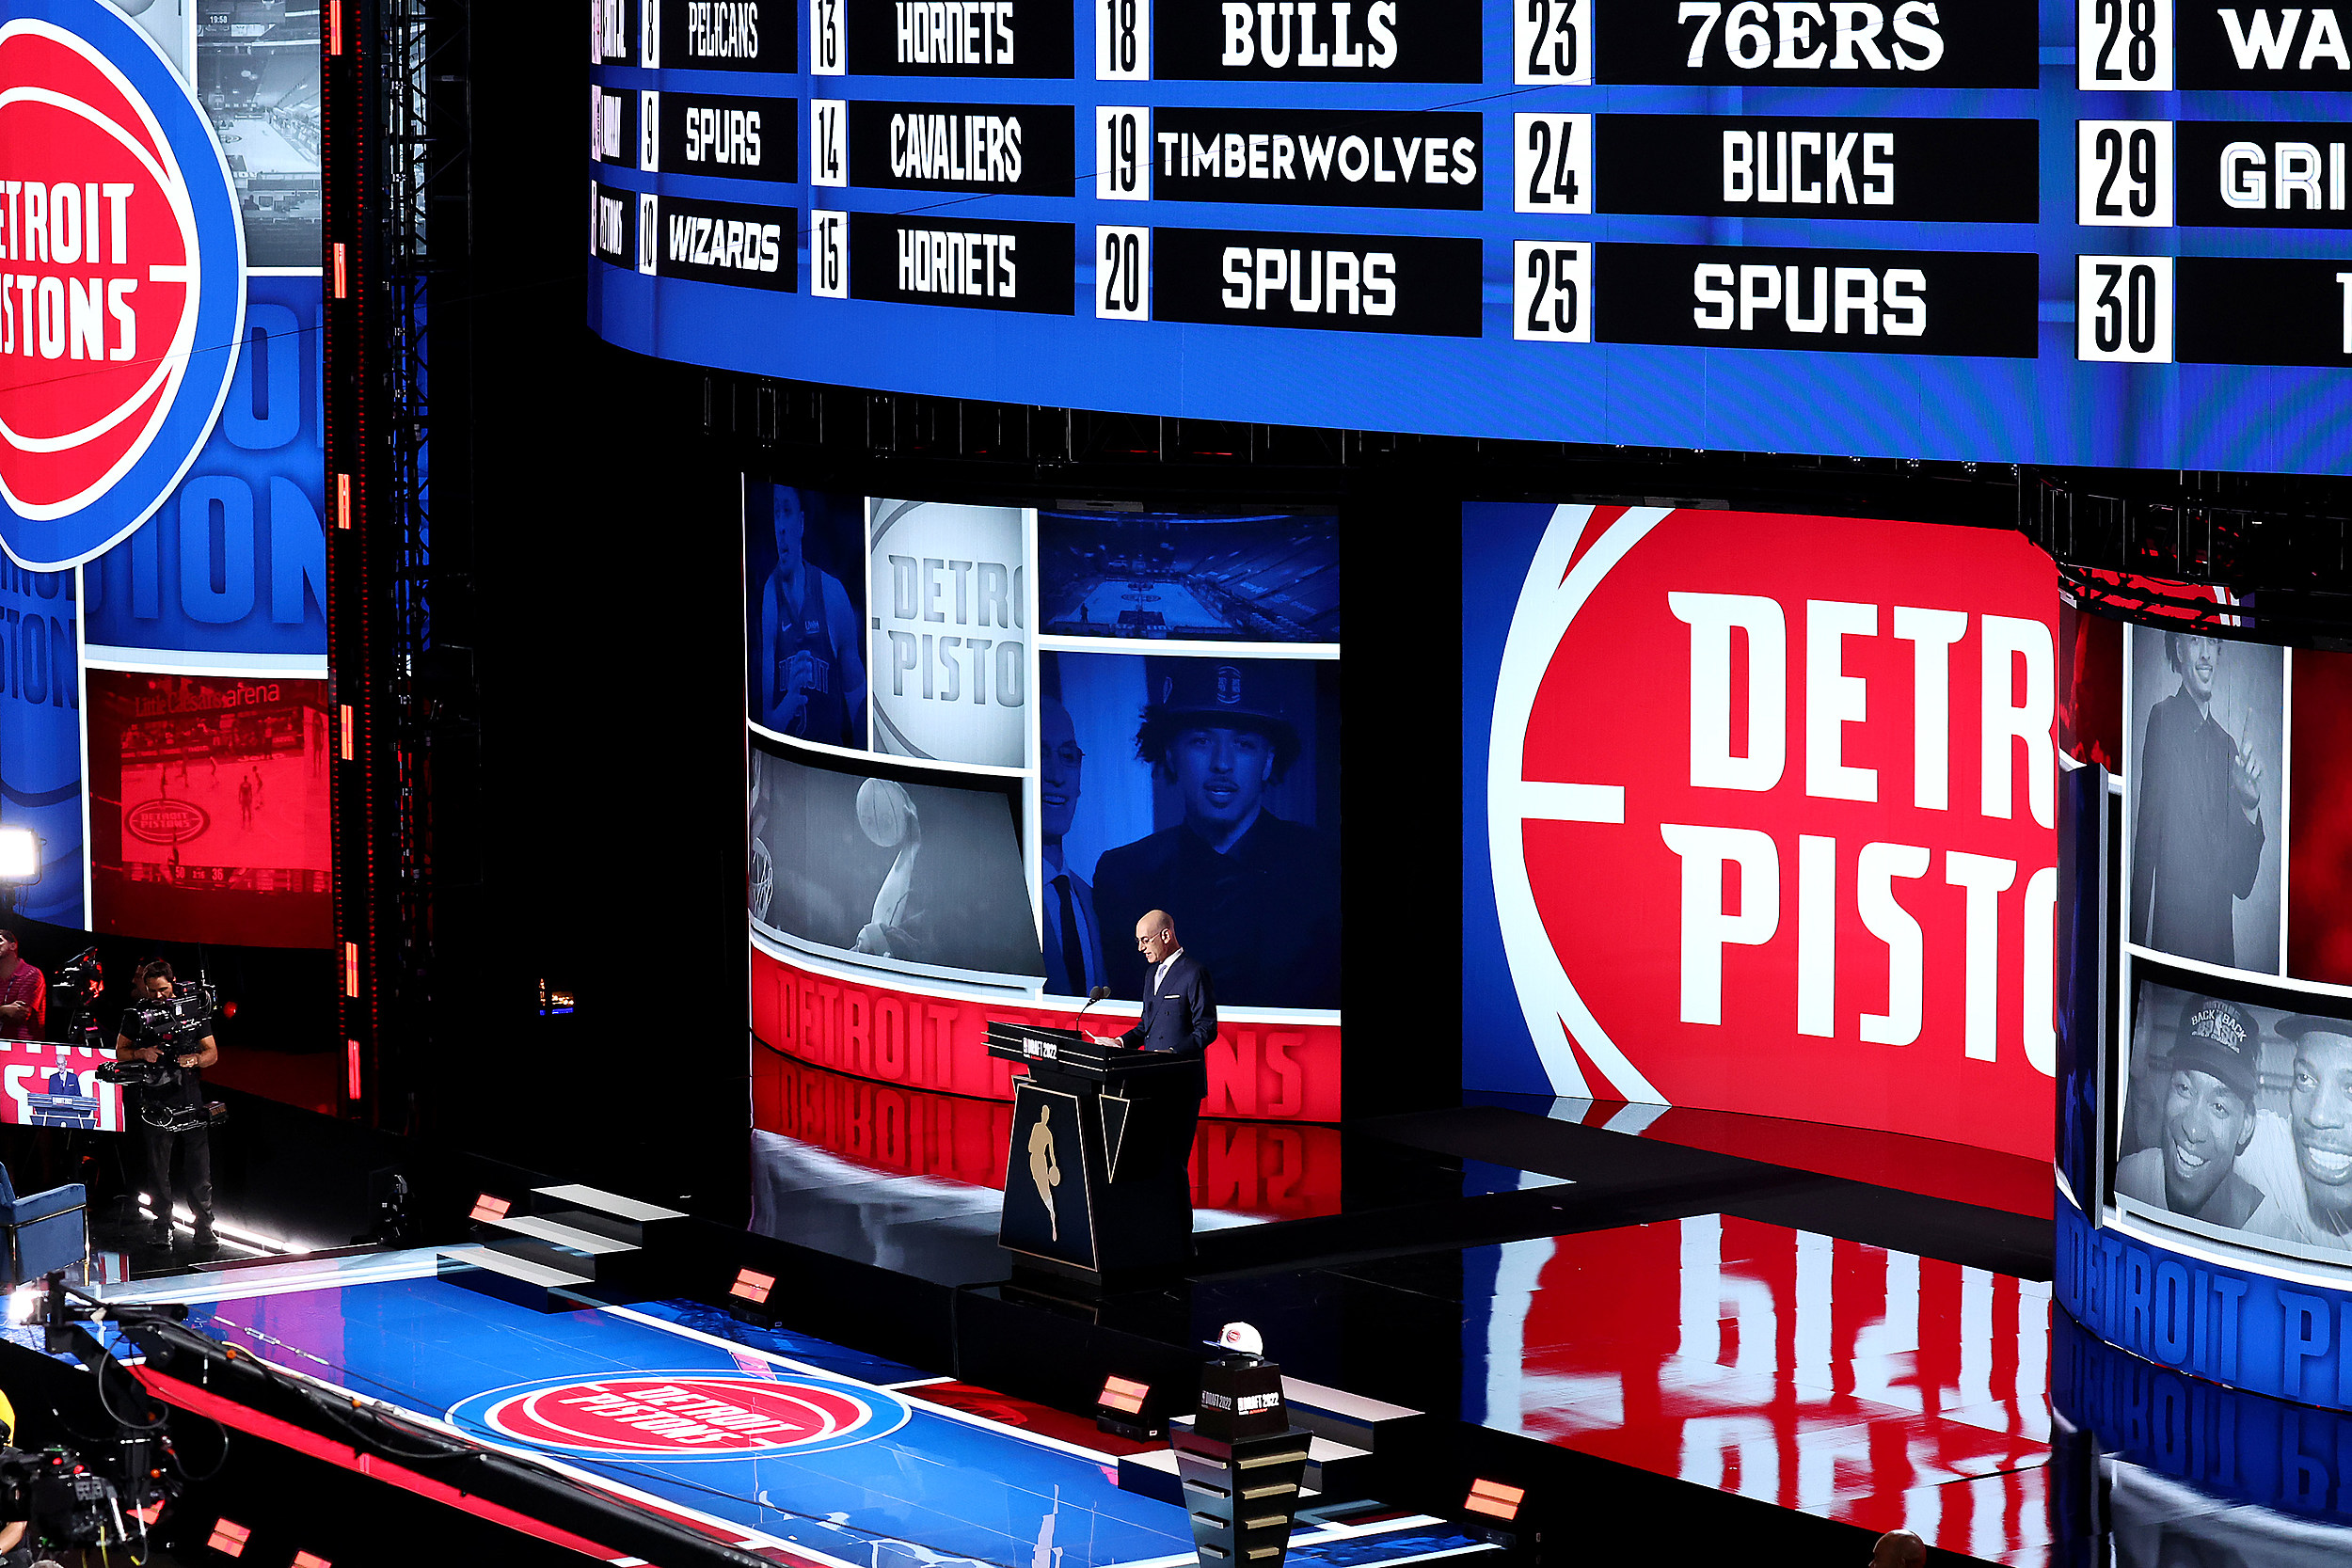 Top Reactions to Pistons Falling to 5th Pick in NBA Draft Lottery